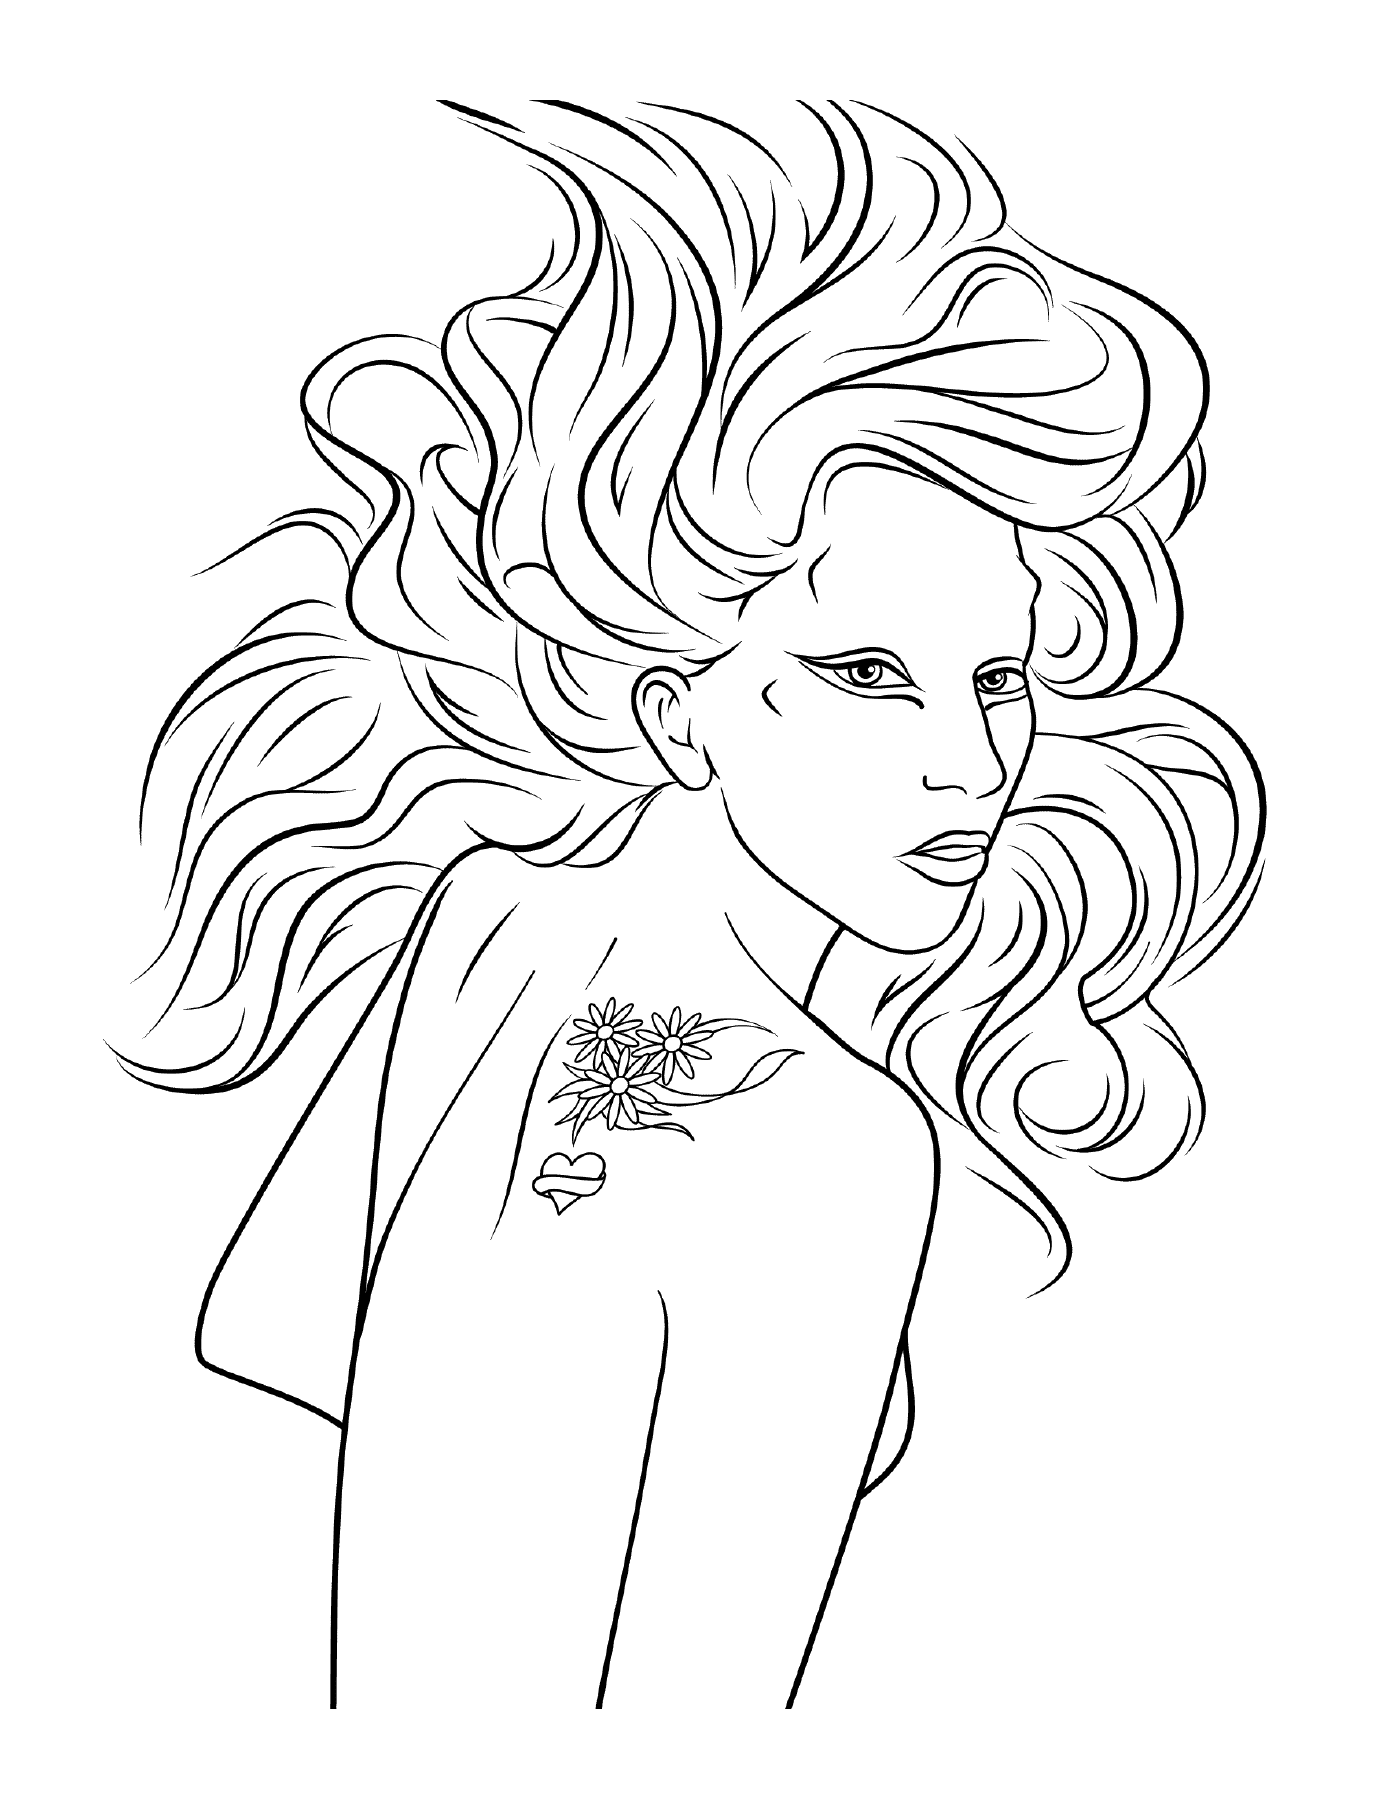  A woman with long hair 